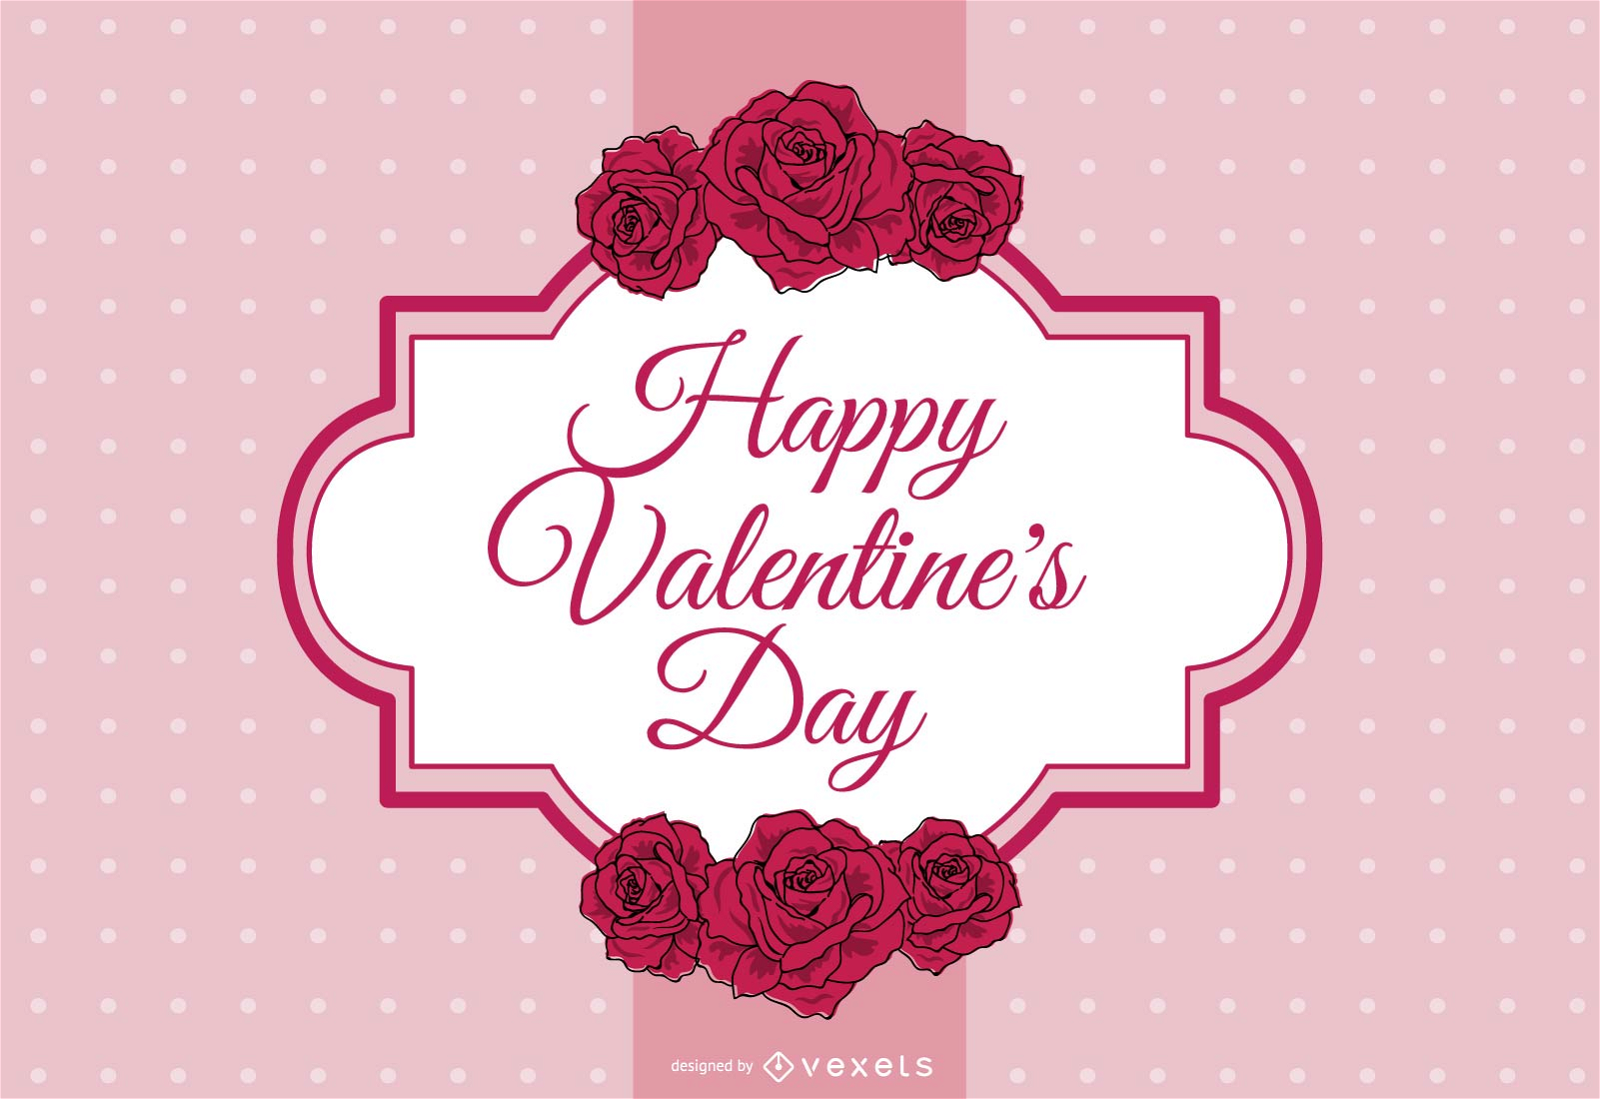 Valentine's Day design with label and decoration